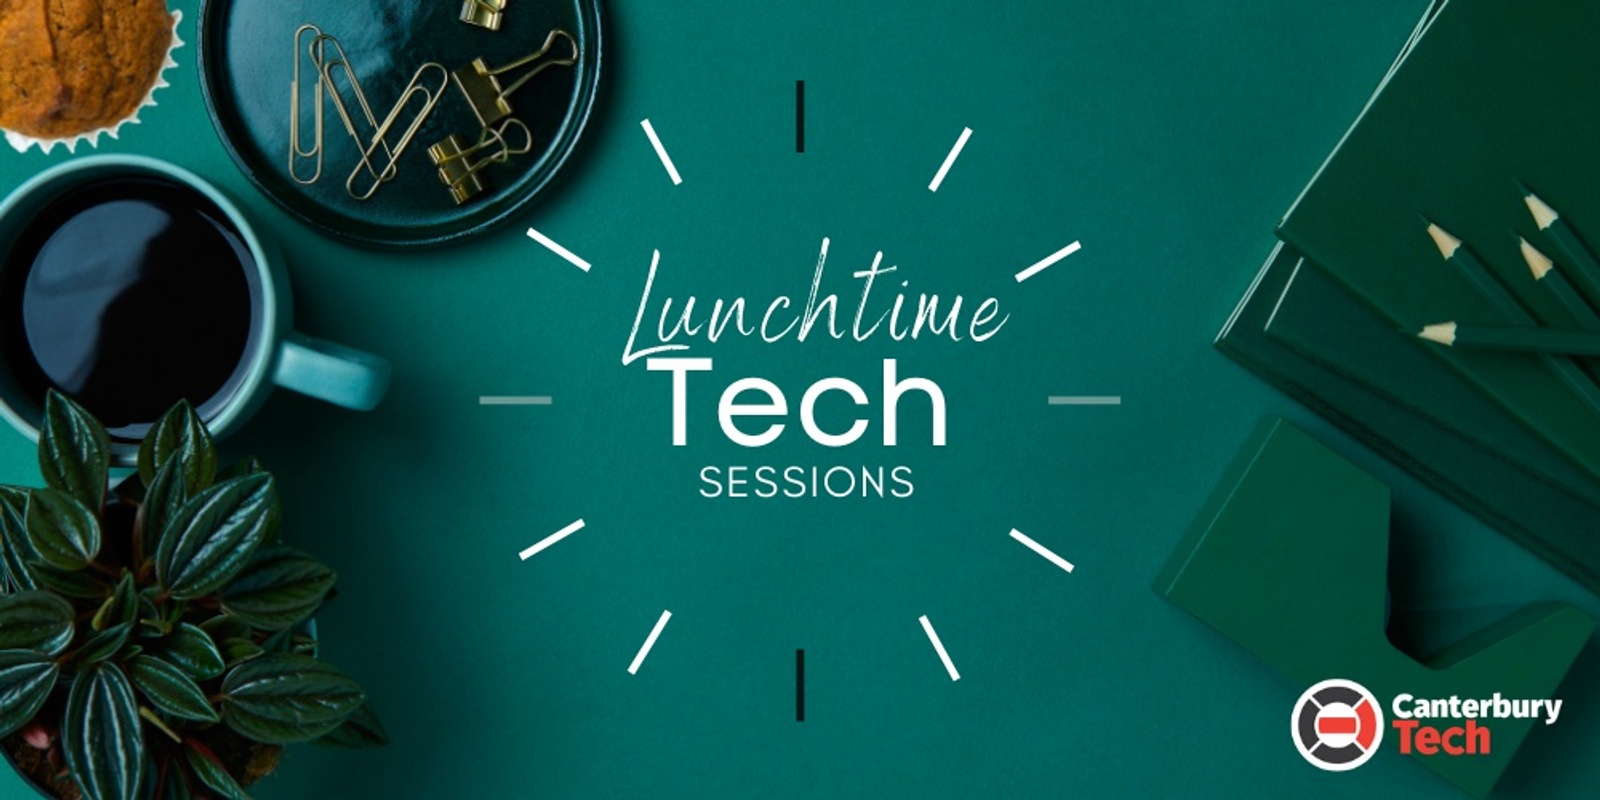 Lunchtime Tech Sessions by Canterbury Tech - 2 March 2022